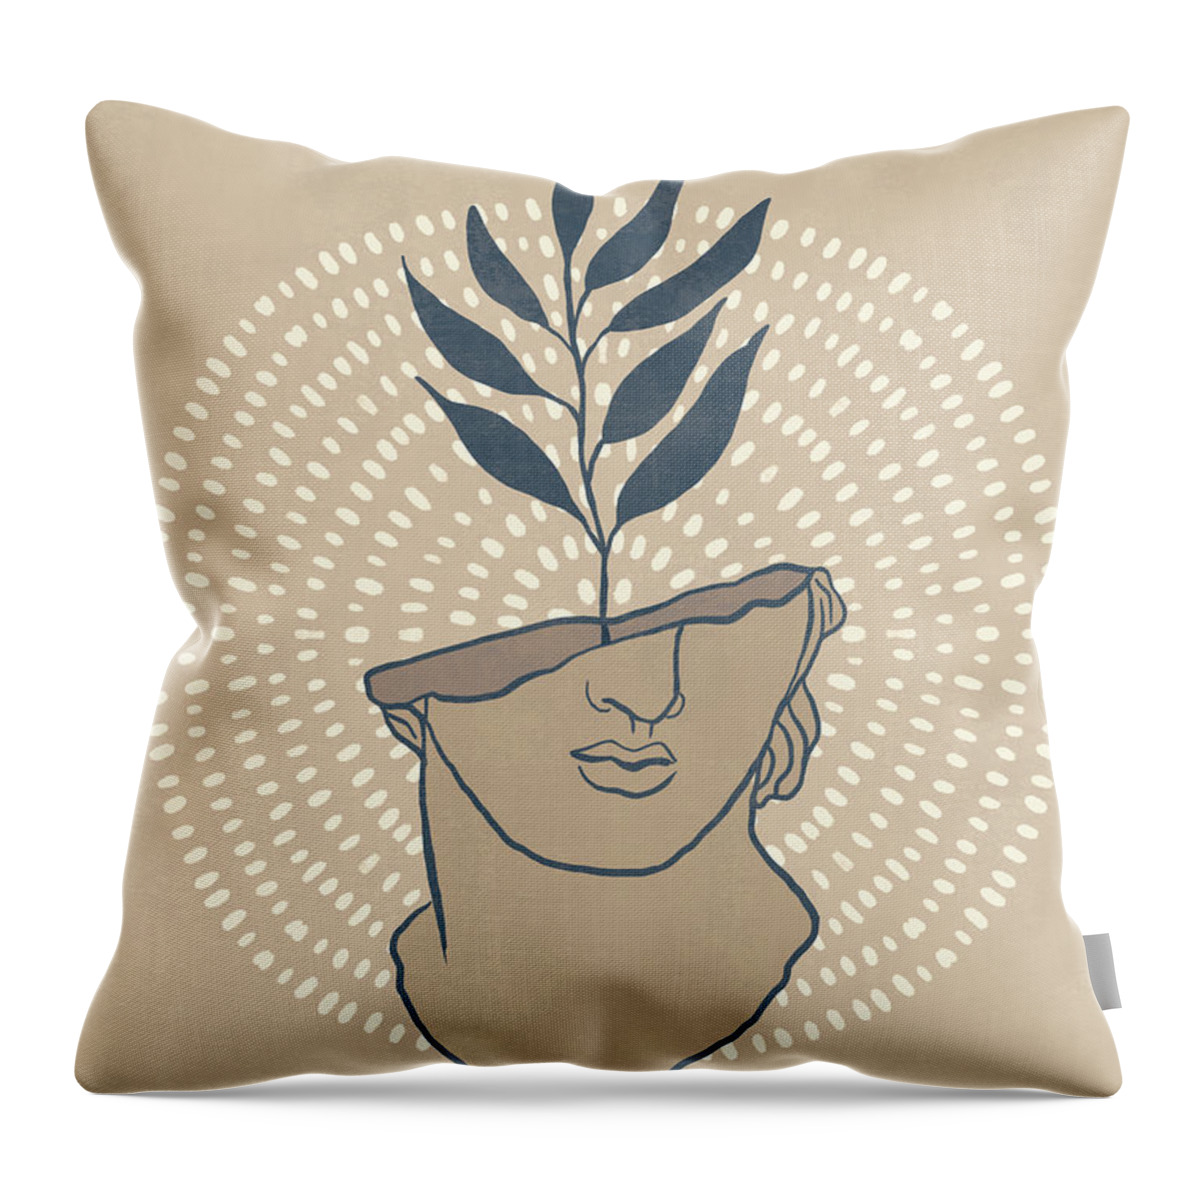 Minimal Throw Pillow featuring the digital art Planting a Thought 03 - Minimal, Modern - Monochromatic Contemporary Abstract by Studio Grafiikka